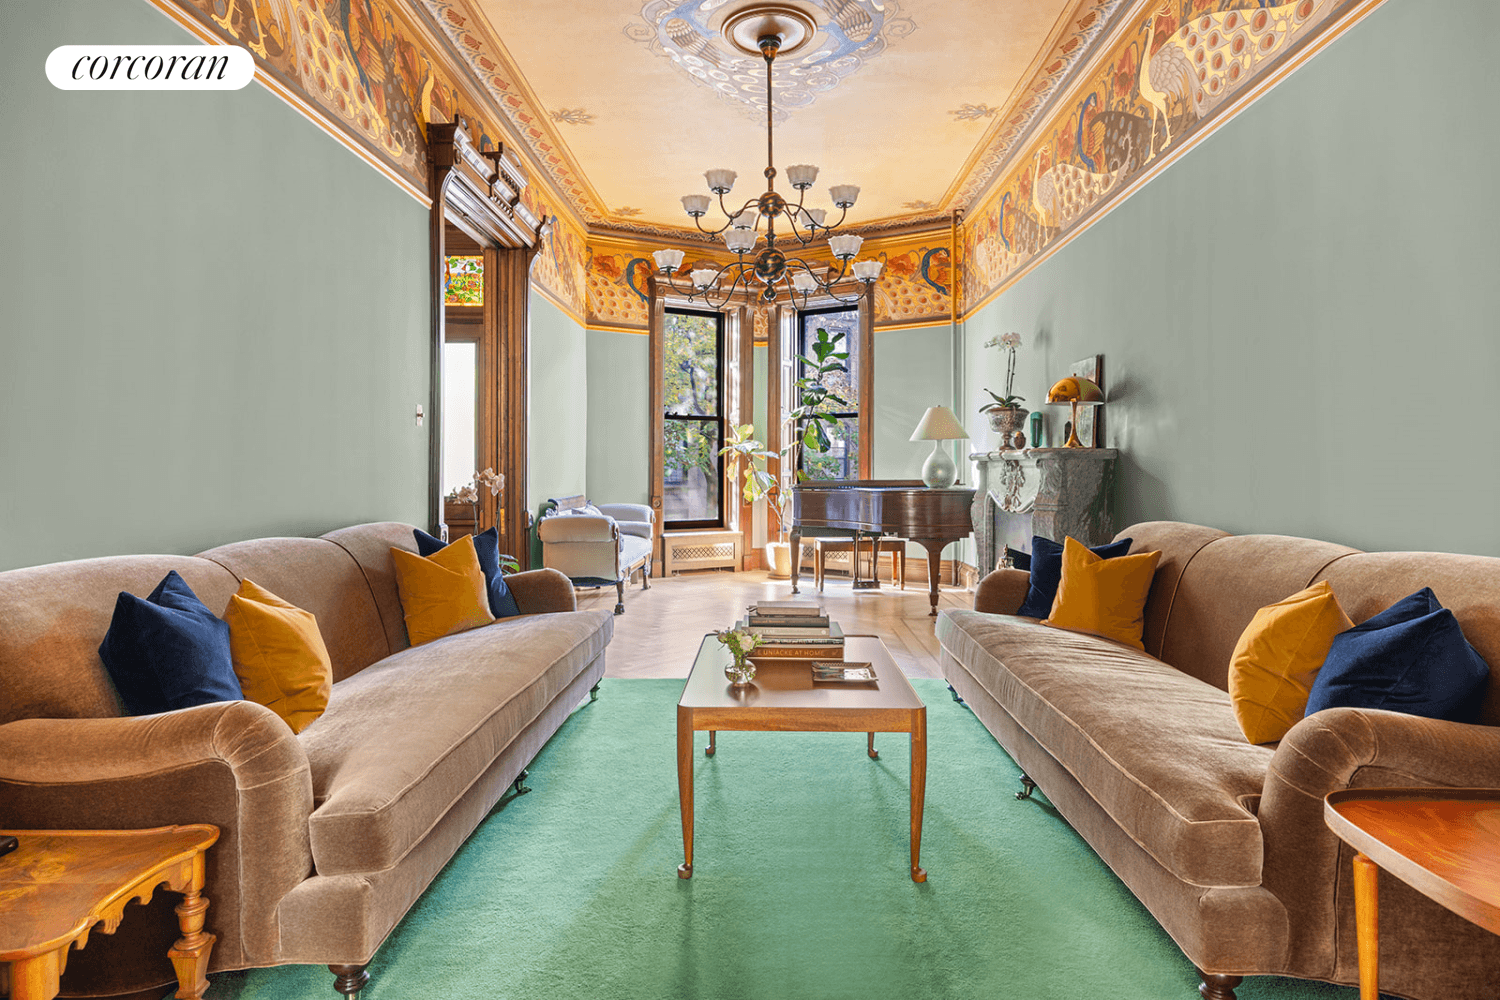 Be the fortunate resident to rent and enjoy a fully furnished 19th century ornamental wonder in prime Park Slope !